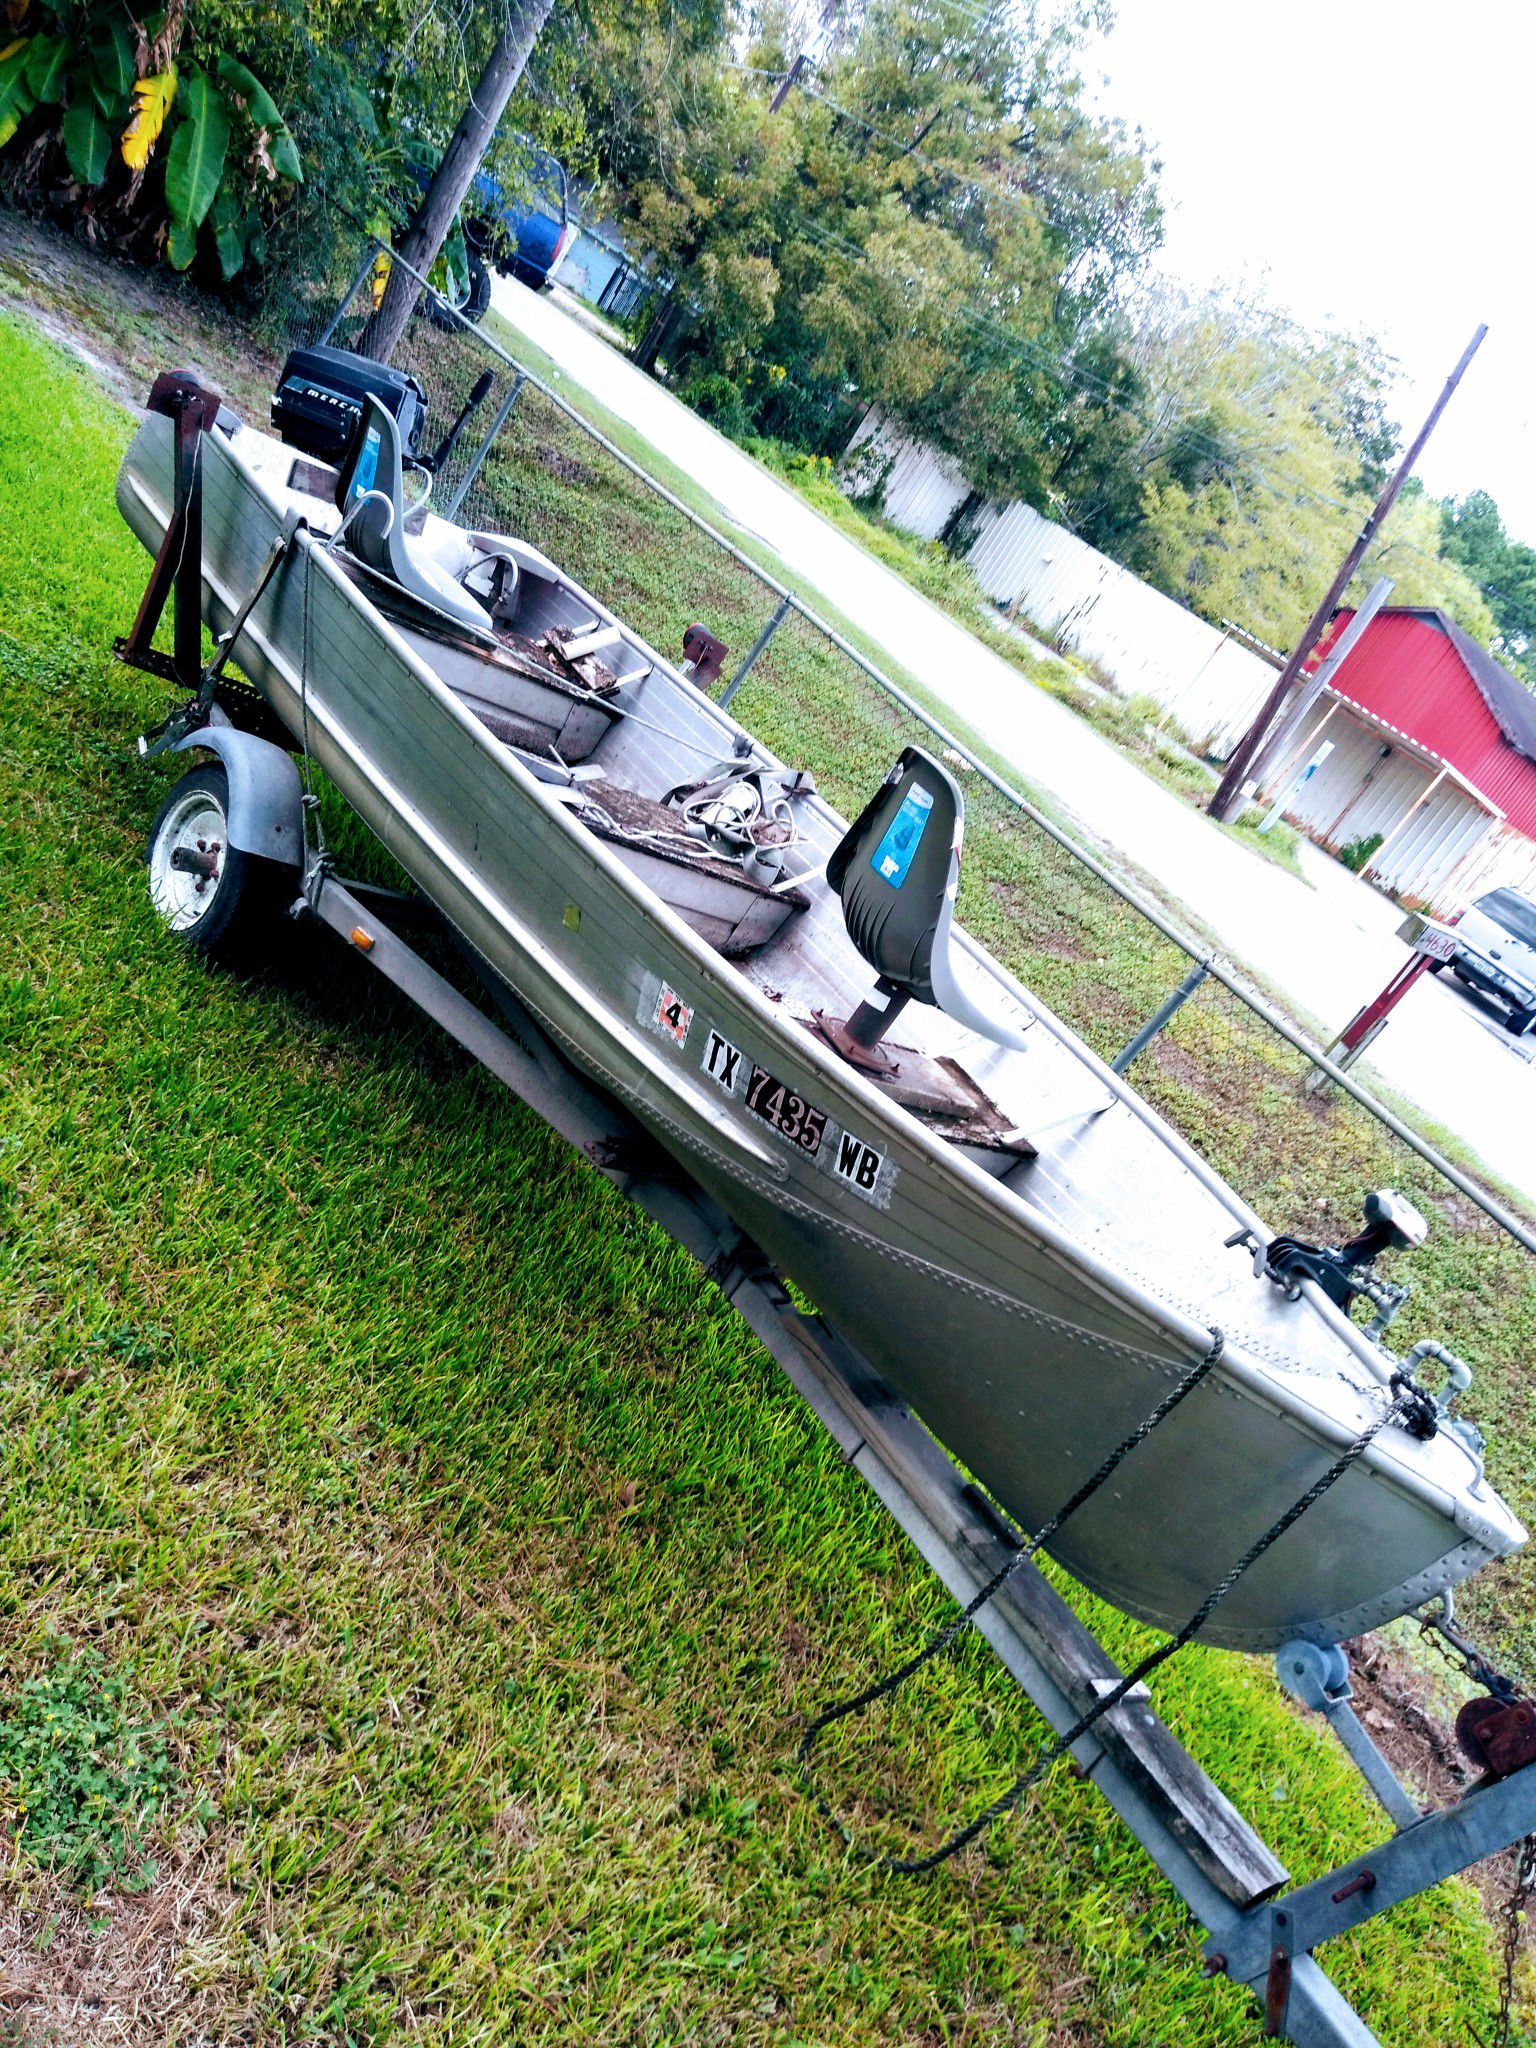 16 ' all aluminum boat, Mercury 11 hp runs n fresh and salt water. Trolling motor included. New seats, gas tank and gas line